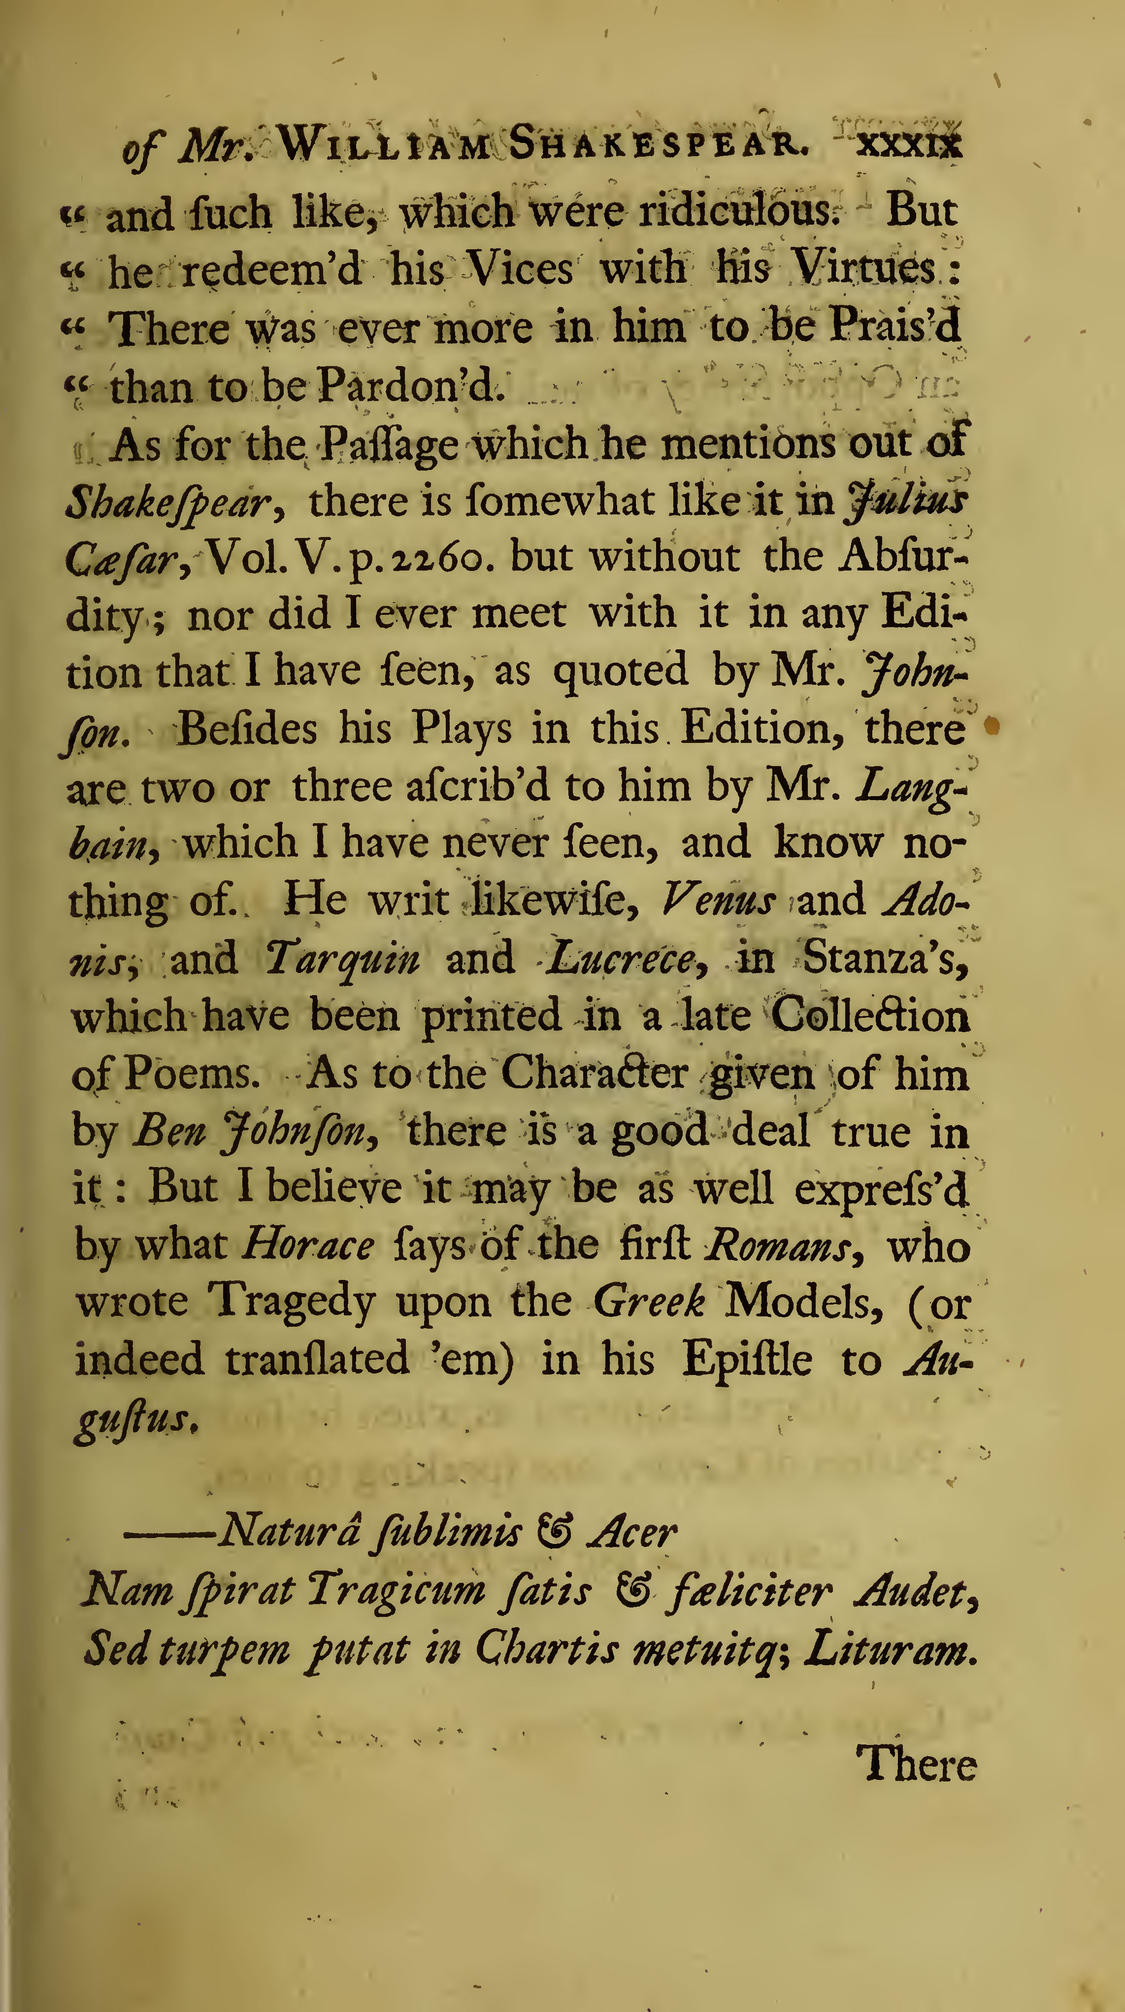 Image of page 57